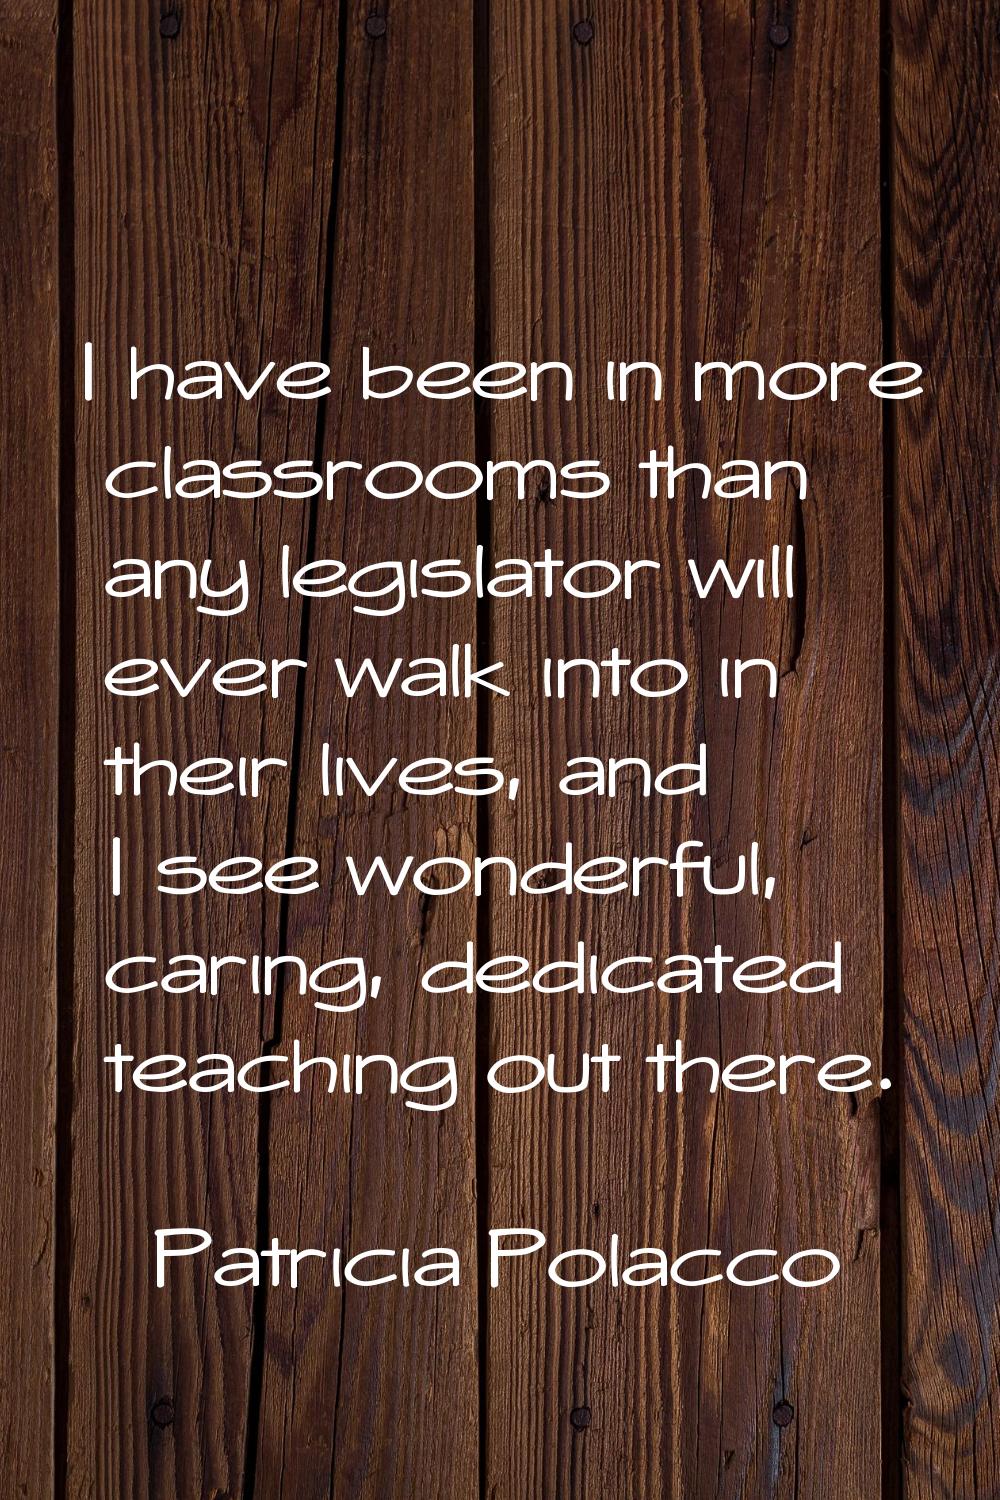 I have been in more classrooms than any legislator will ever walk into in their lives, and I see wo